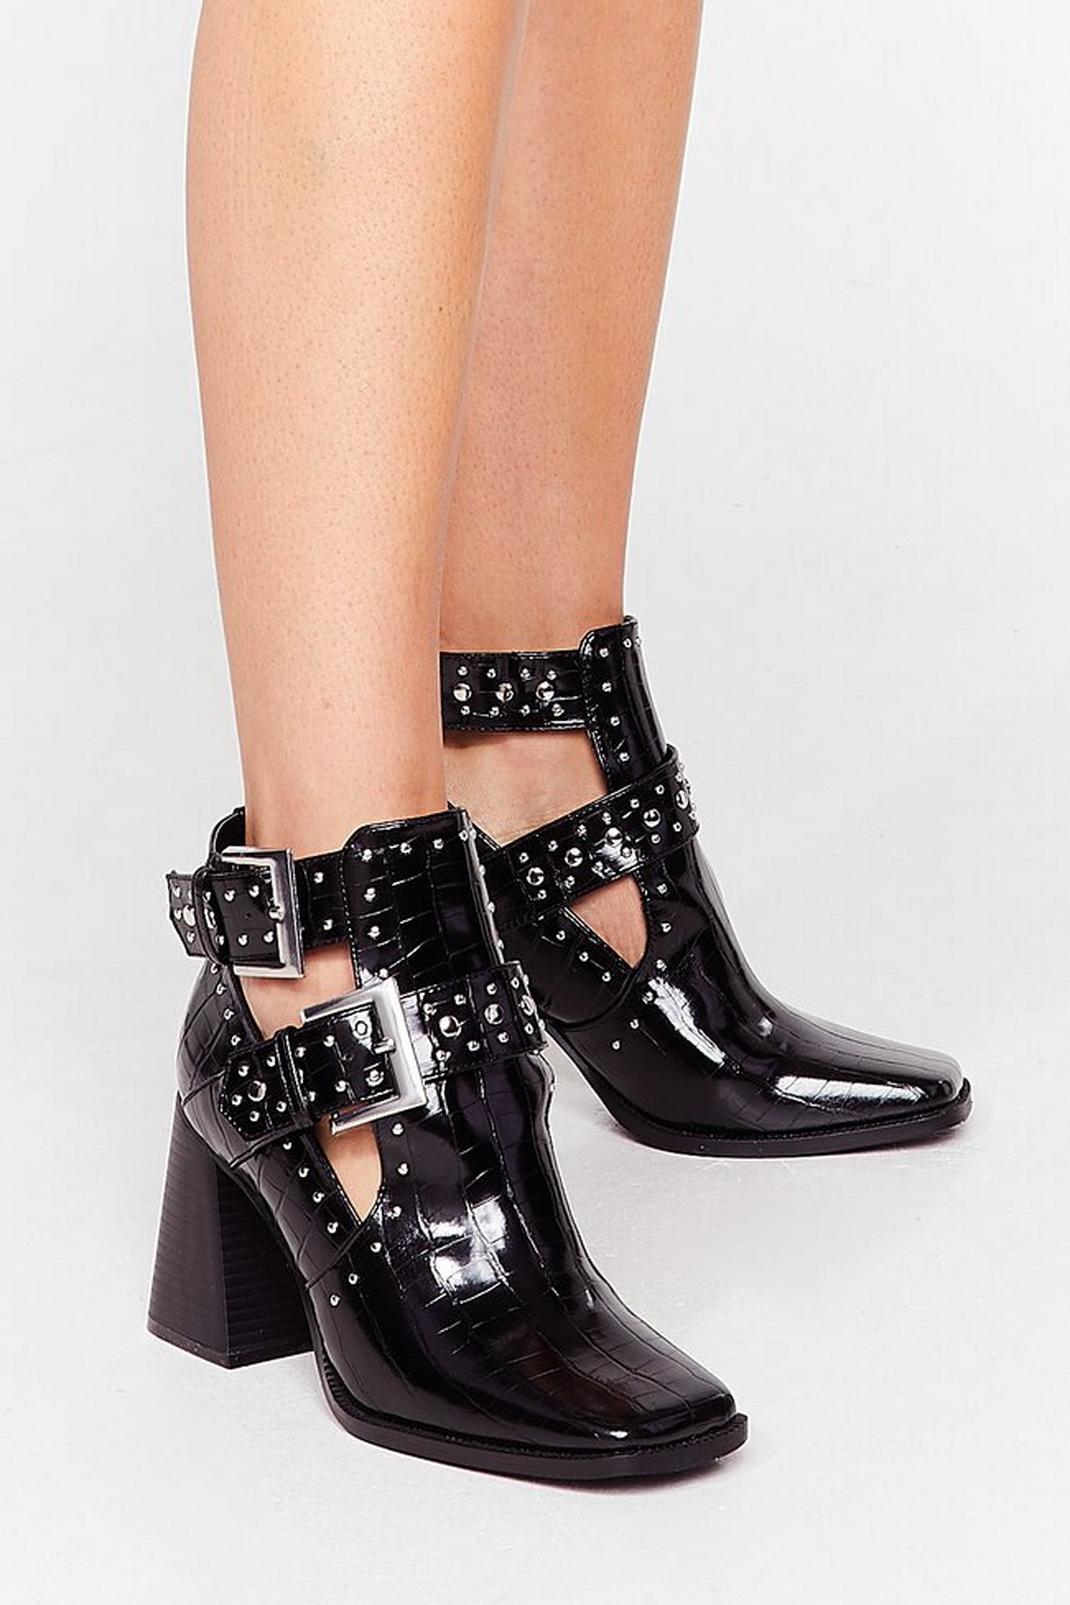 Black Stud Times Coming Croc Heeled Boots image number 1